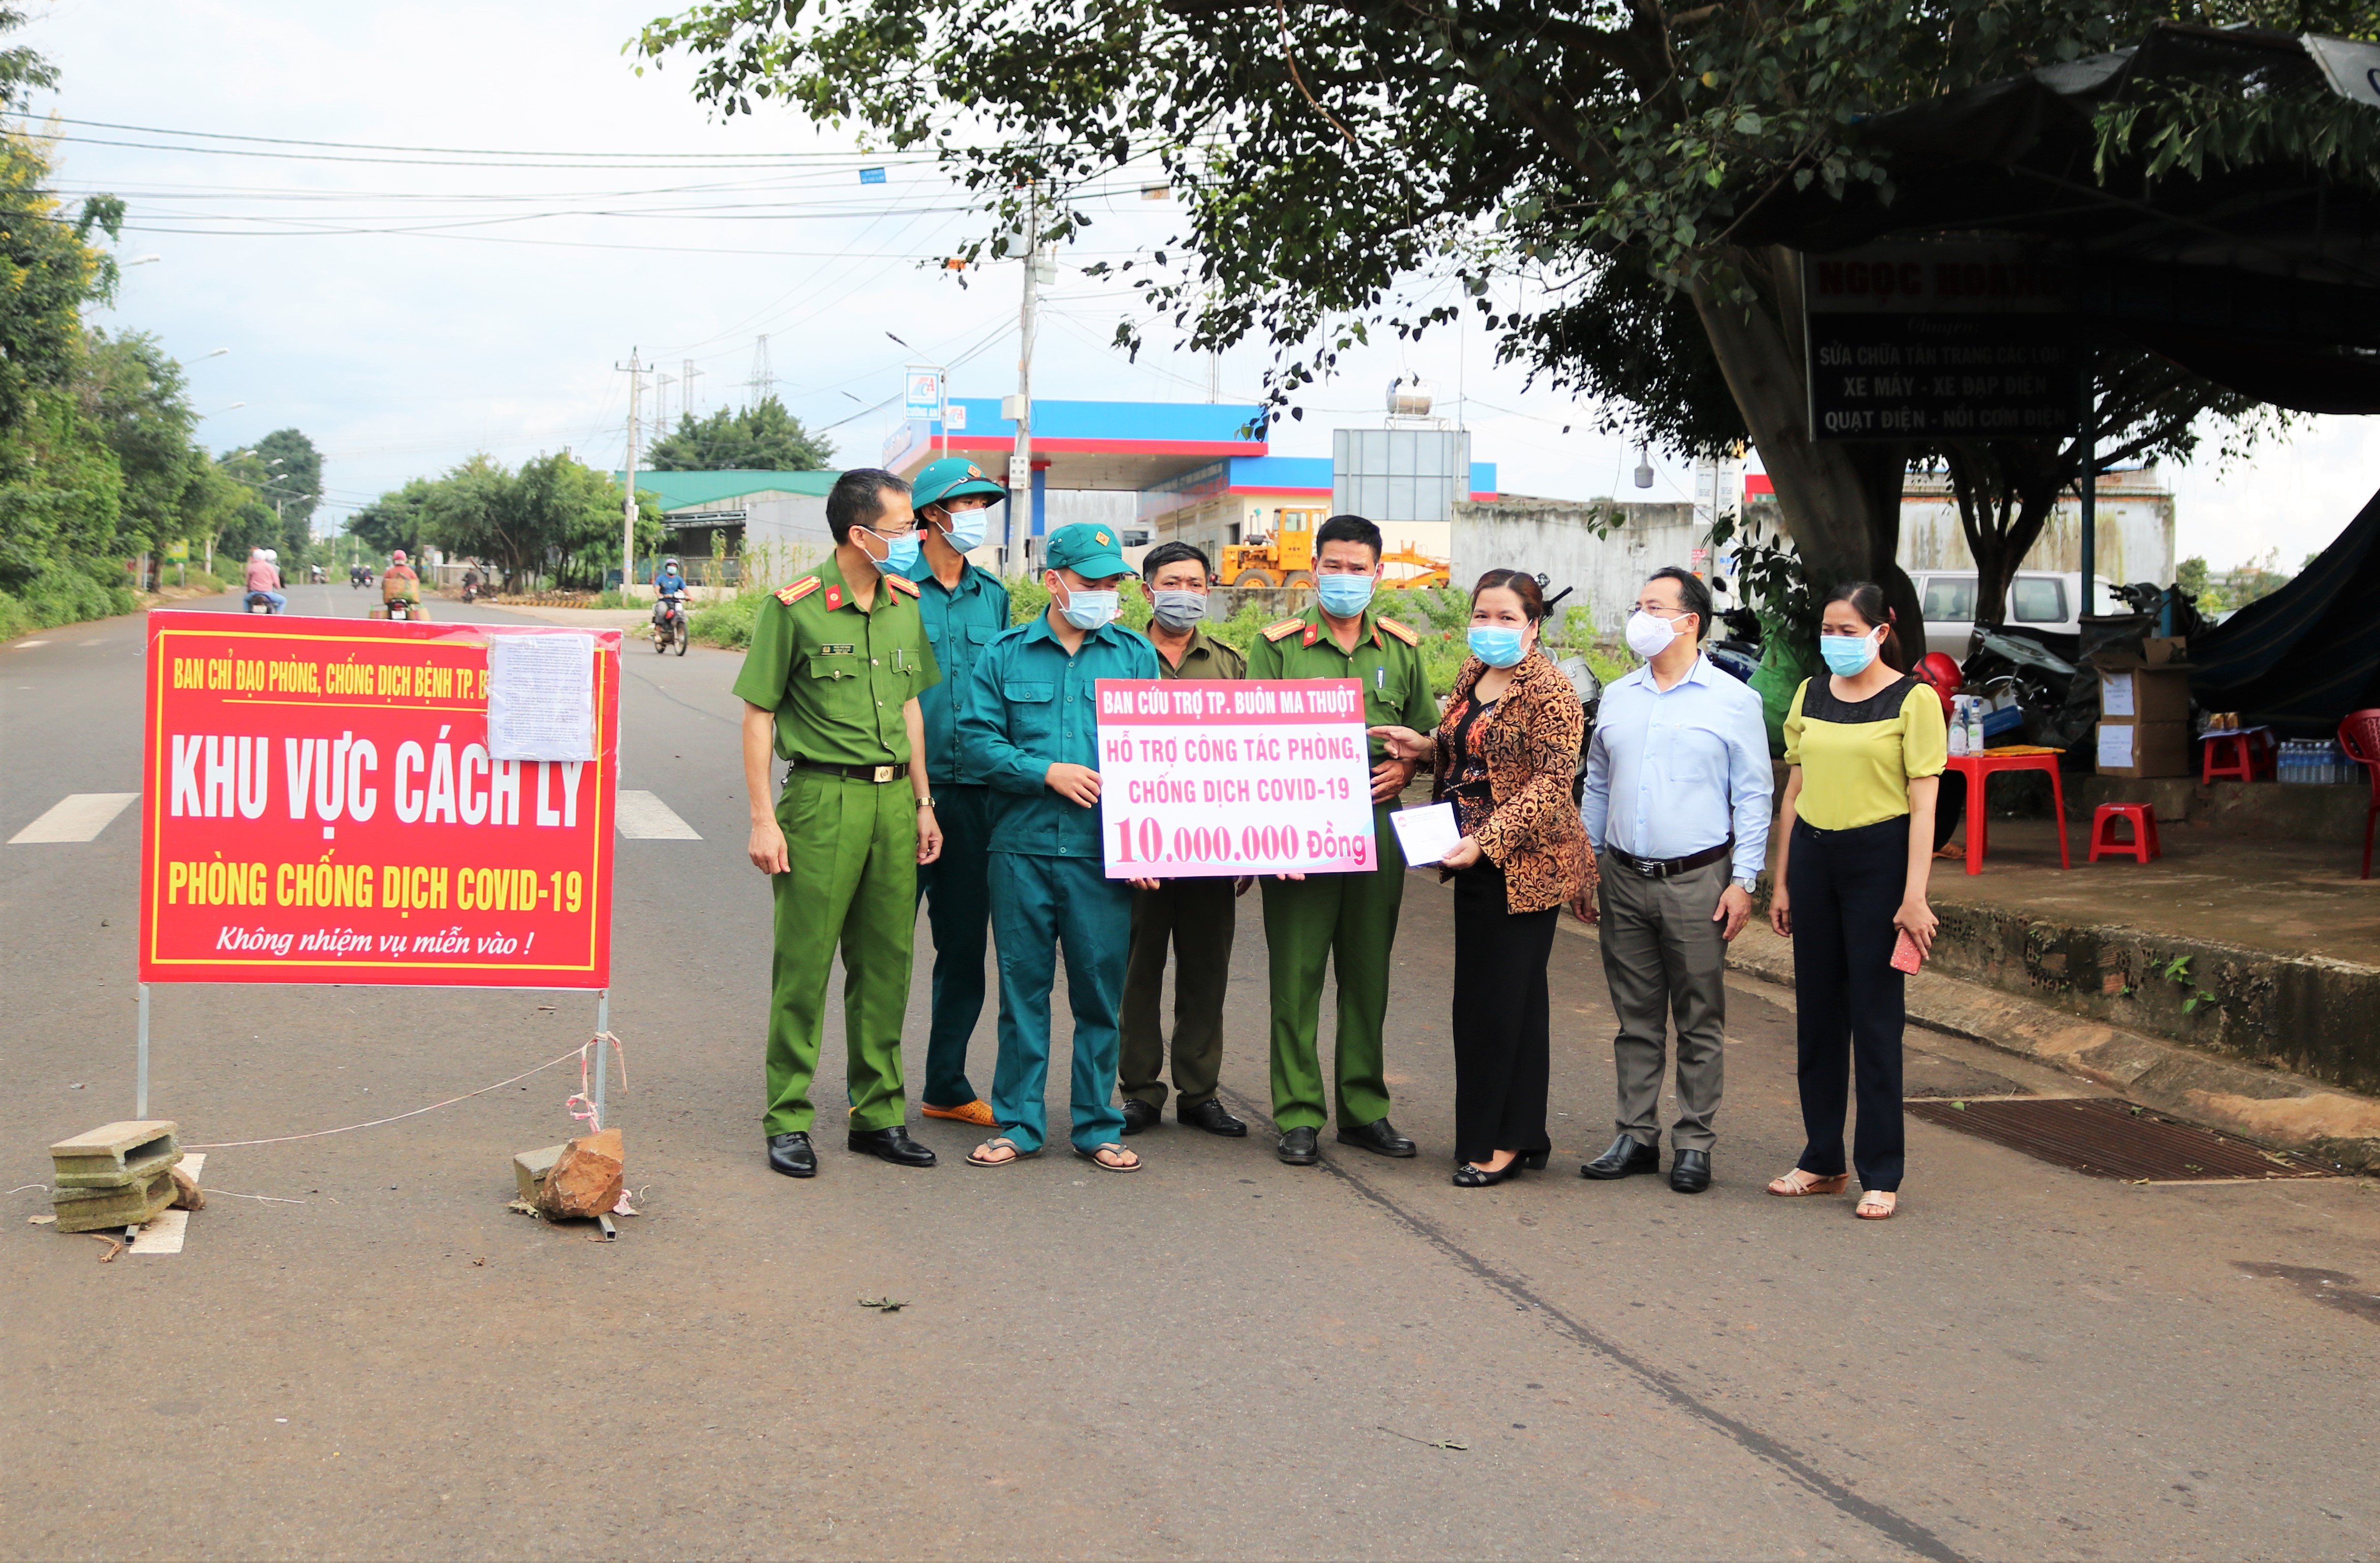 Visiting and giving gifts to COVID-19 checkpoints in Buon Ma Thuot City